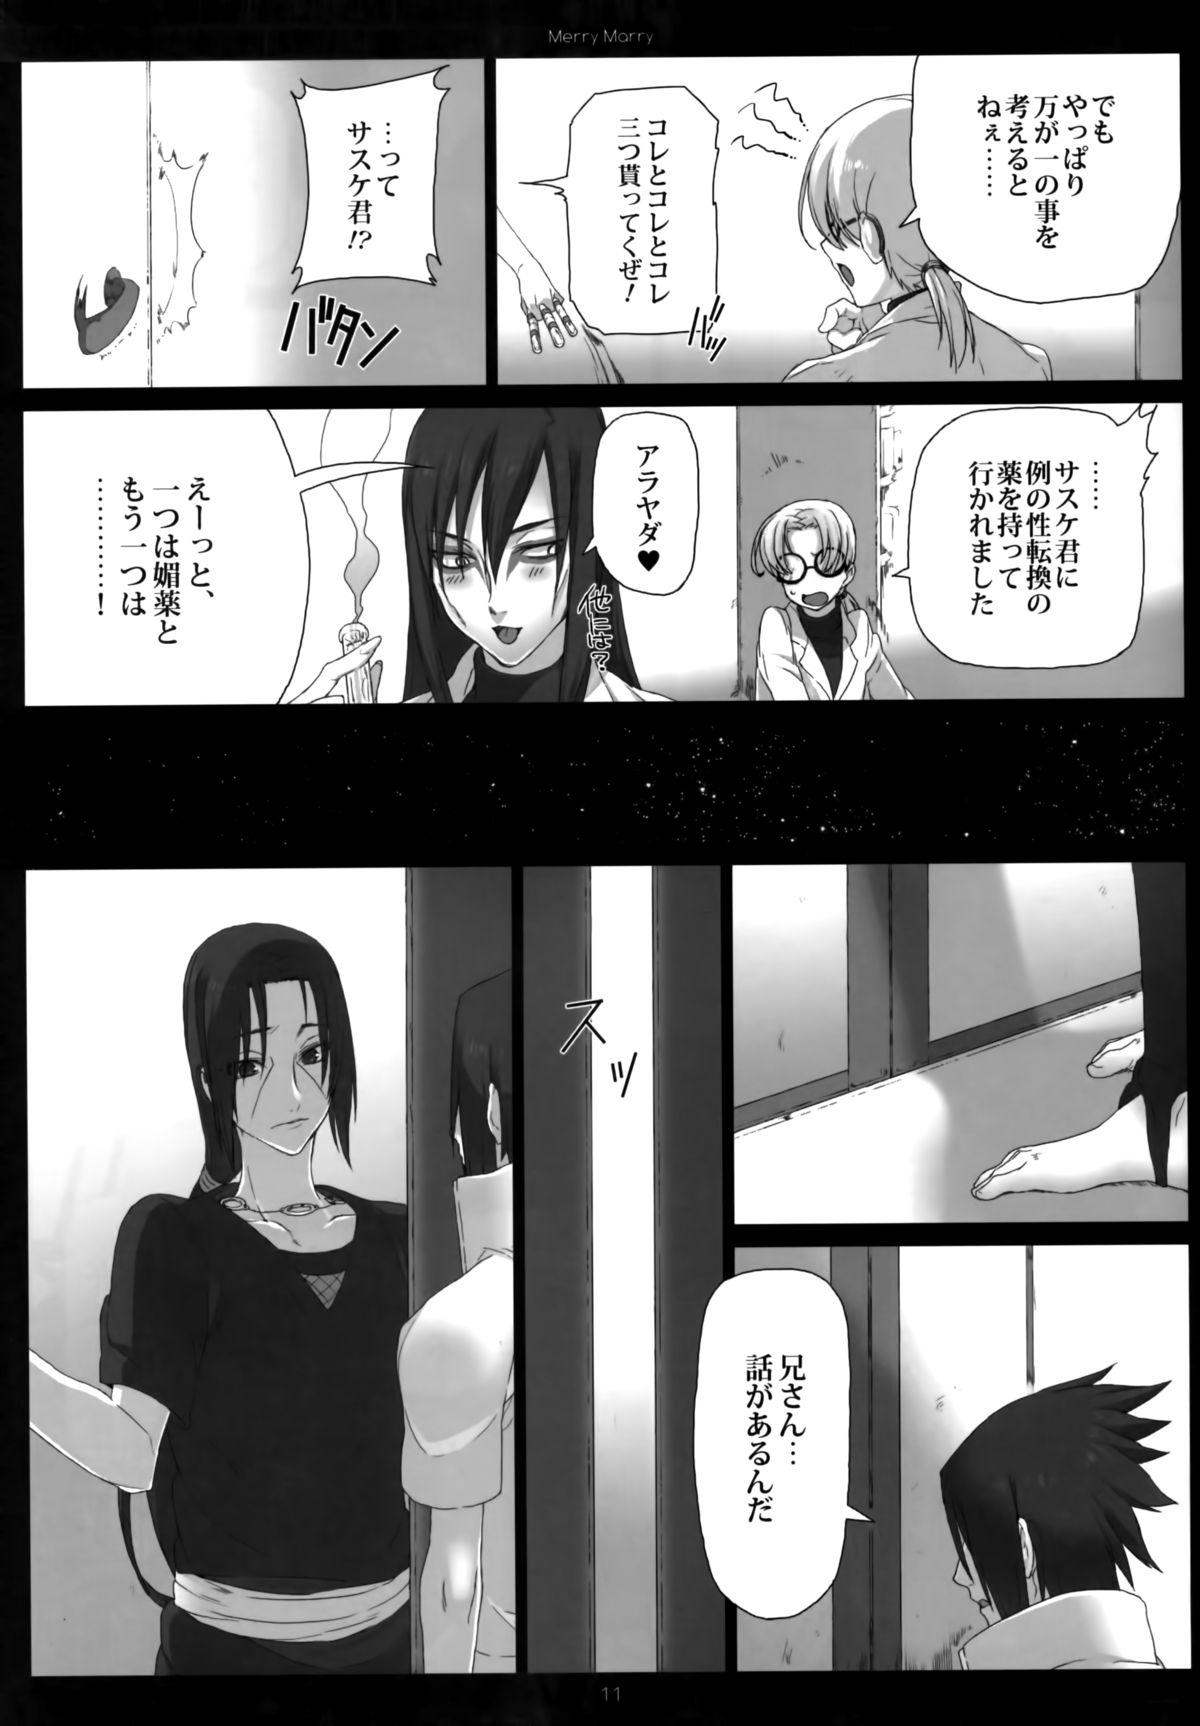 Solo Female Merry Marry - Naruto Shower - Page 11